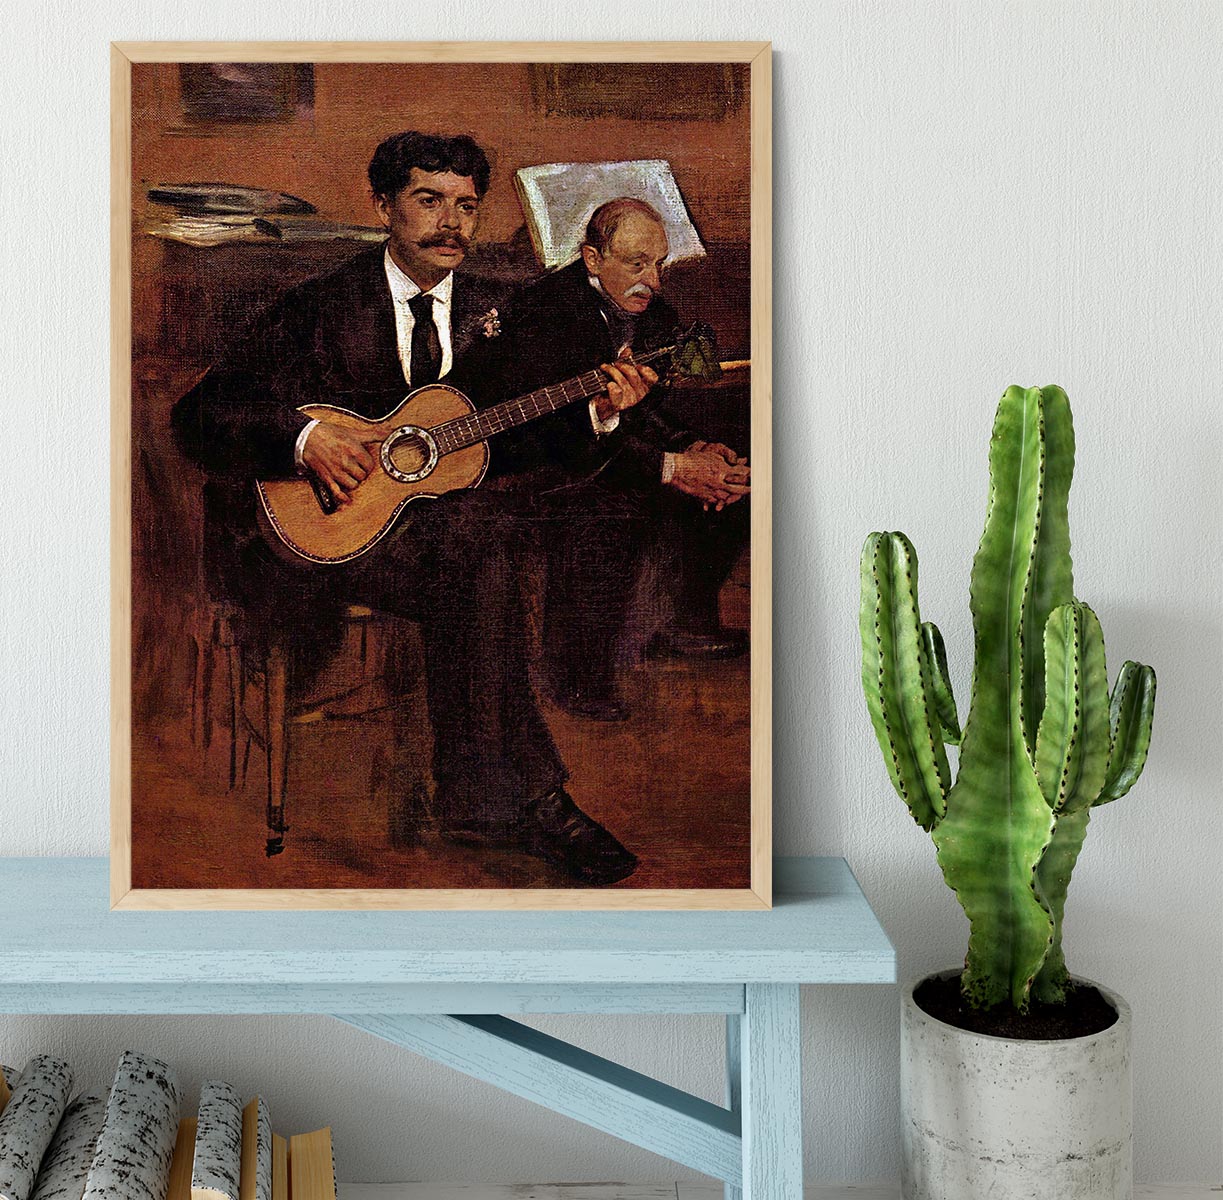 The guitarist Pagans and Monsieur Degas by Manet Framed Print - Canvas Art Rocks - 4